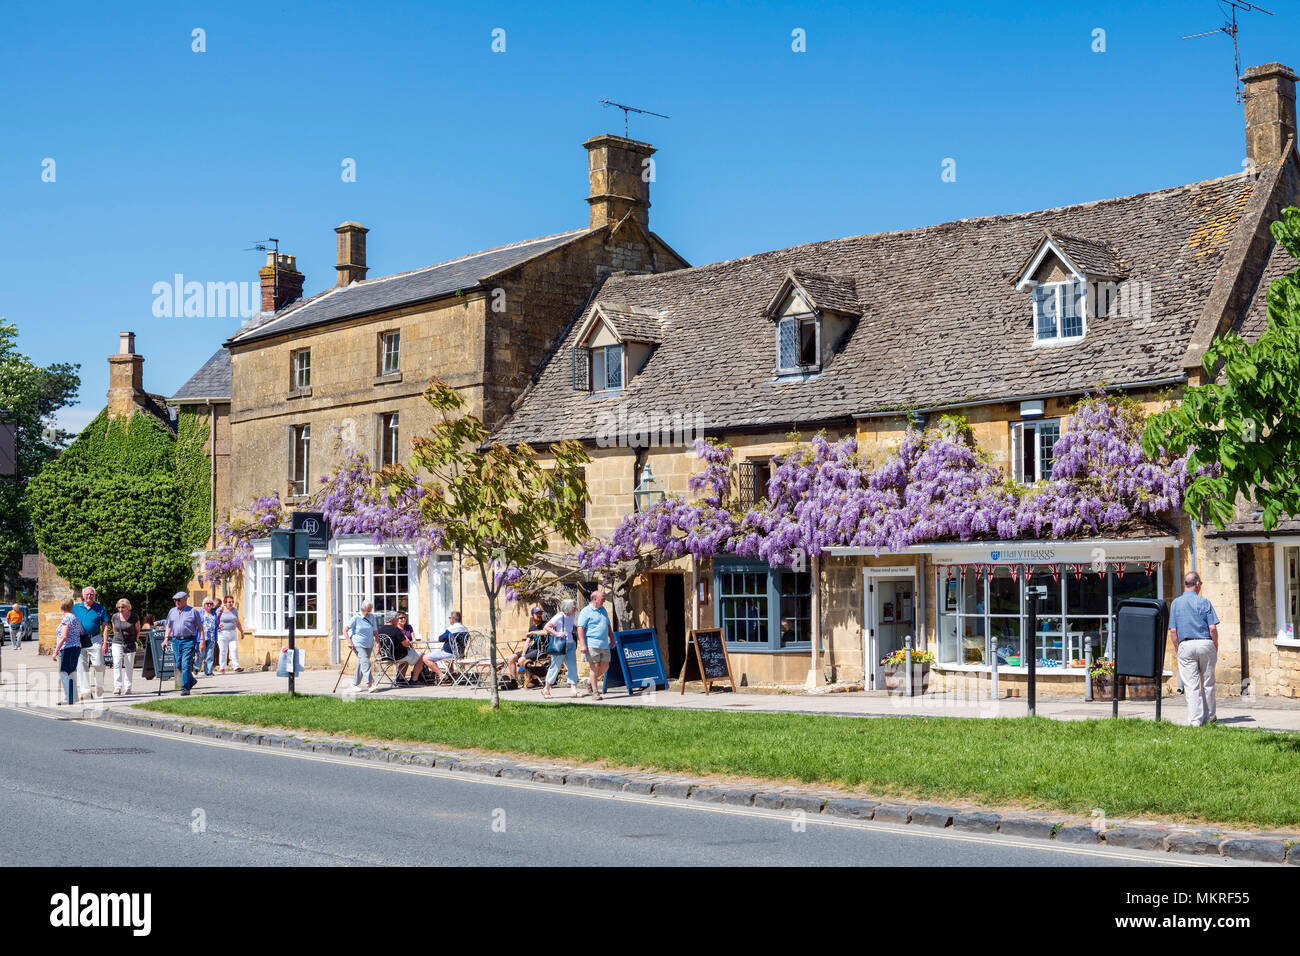 Broadway Cotswolds, UK. Wisteria in Blüte, reife Muster Anlage im Cotswold Village des Broadway. Stockfoto